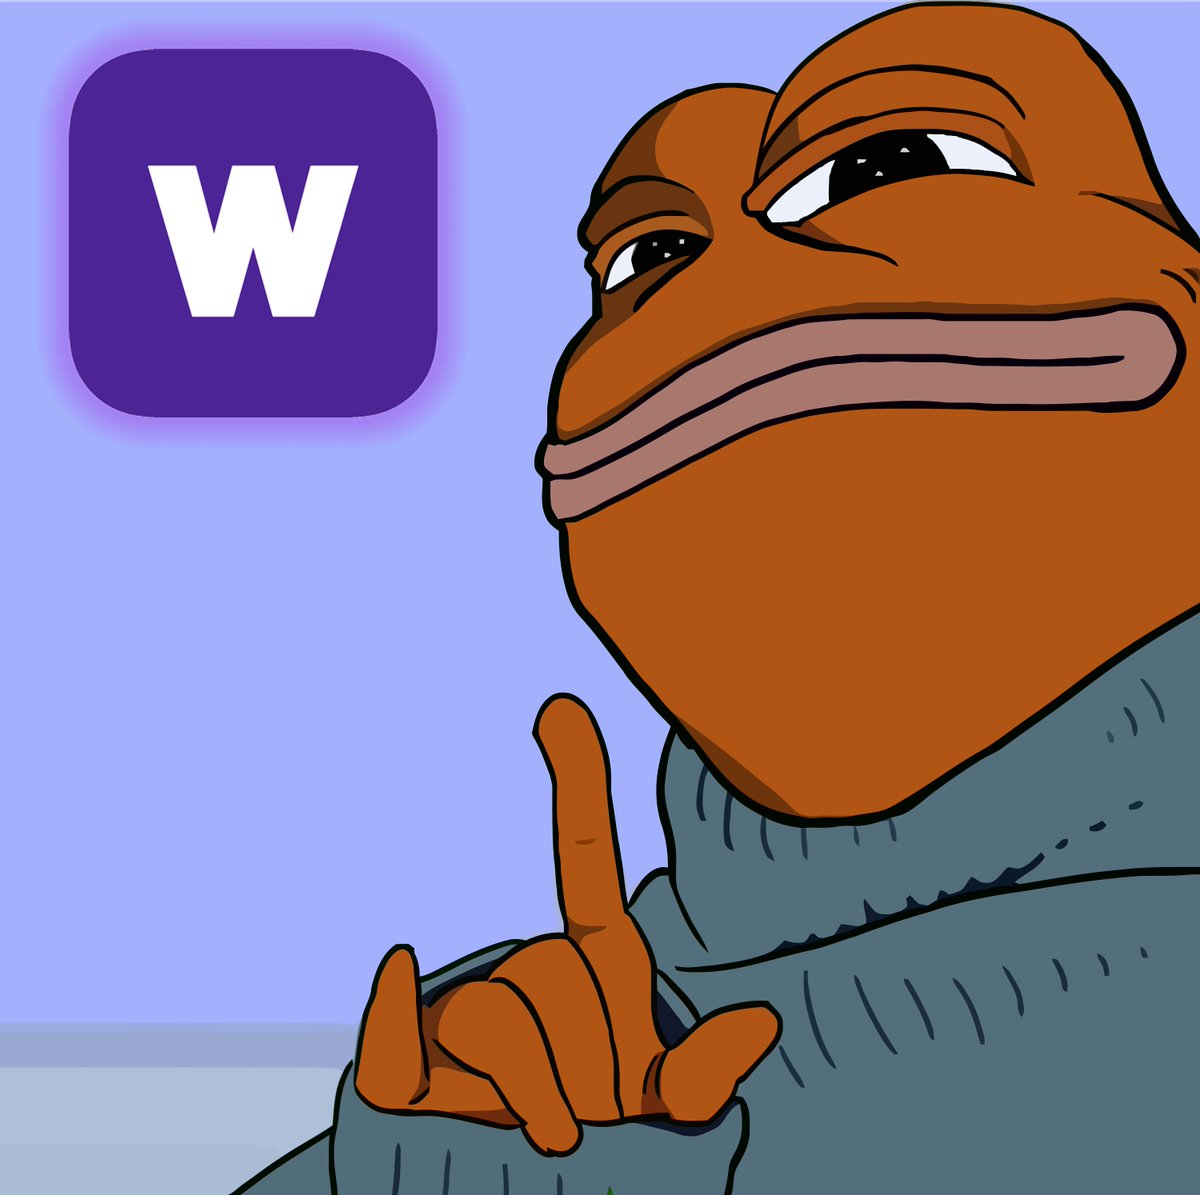 It's Saturday night frens Got a gf yet? Join our Warpcast, so you can party with our boys (and girls) if you feel left alone. No sad homies in my area. Karak Warpcast: warpcast.com/~/invite-page/… Karak Warpcast channel: warpcast.com/~/channel/karak